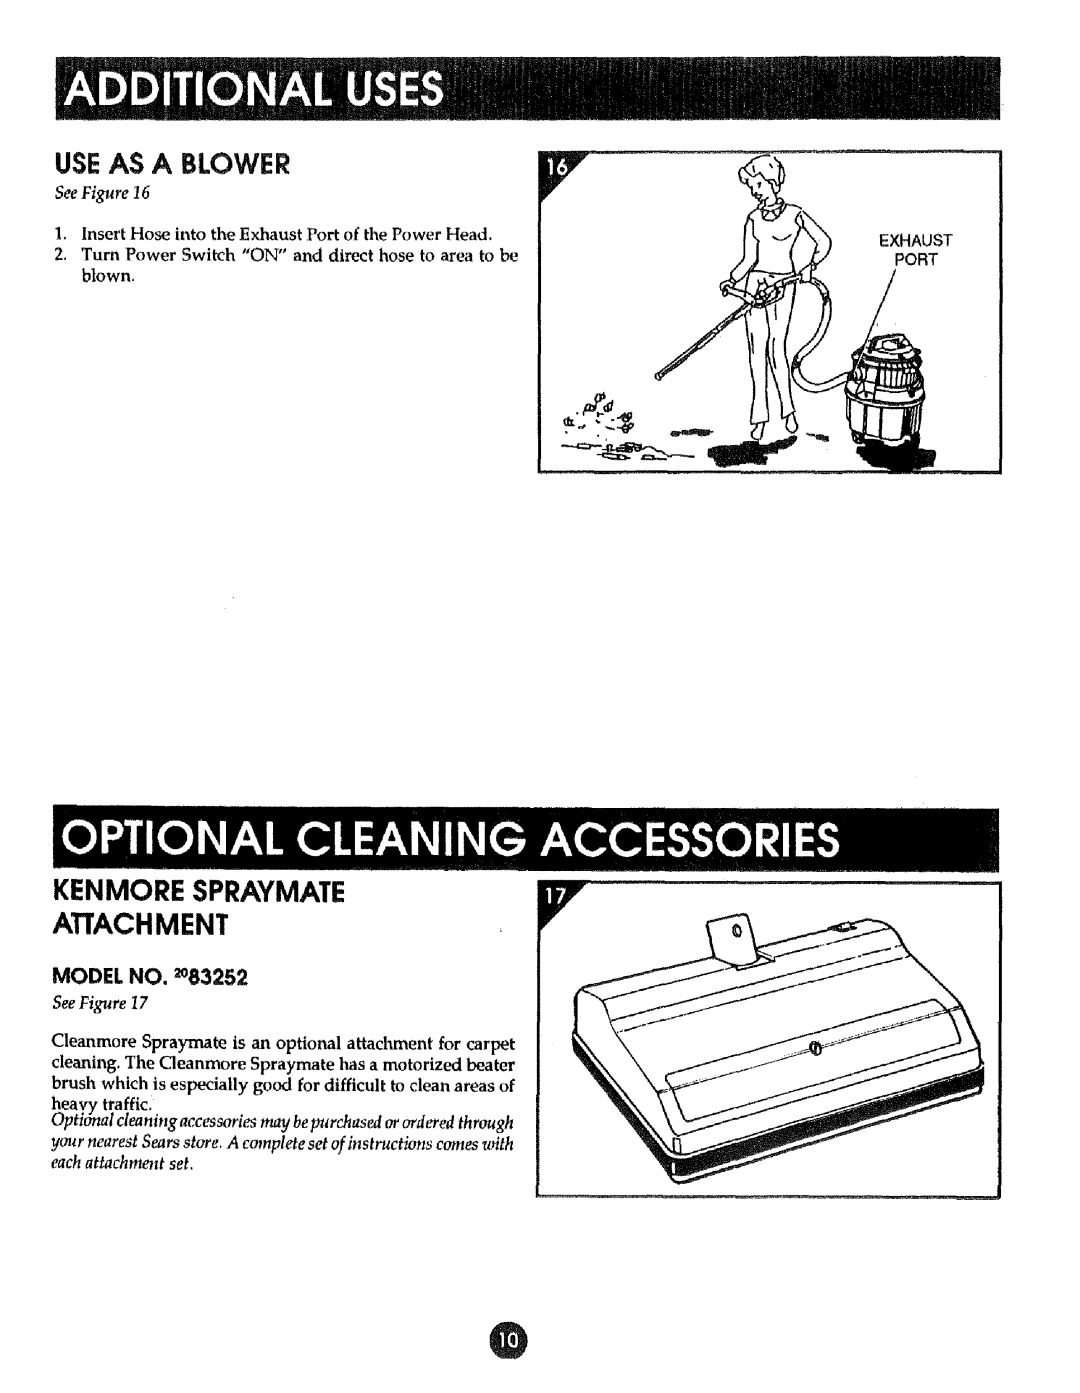 Sears 175 Useas A Blower, Kenmore Spraymate Attachment, Optional cleaning accessories may be purchased or ordered through 